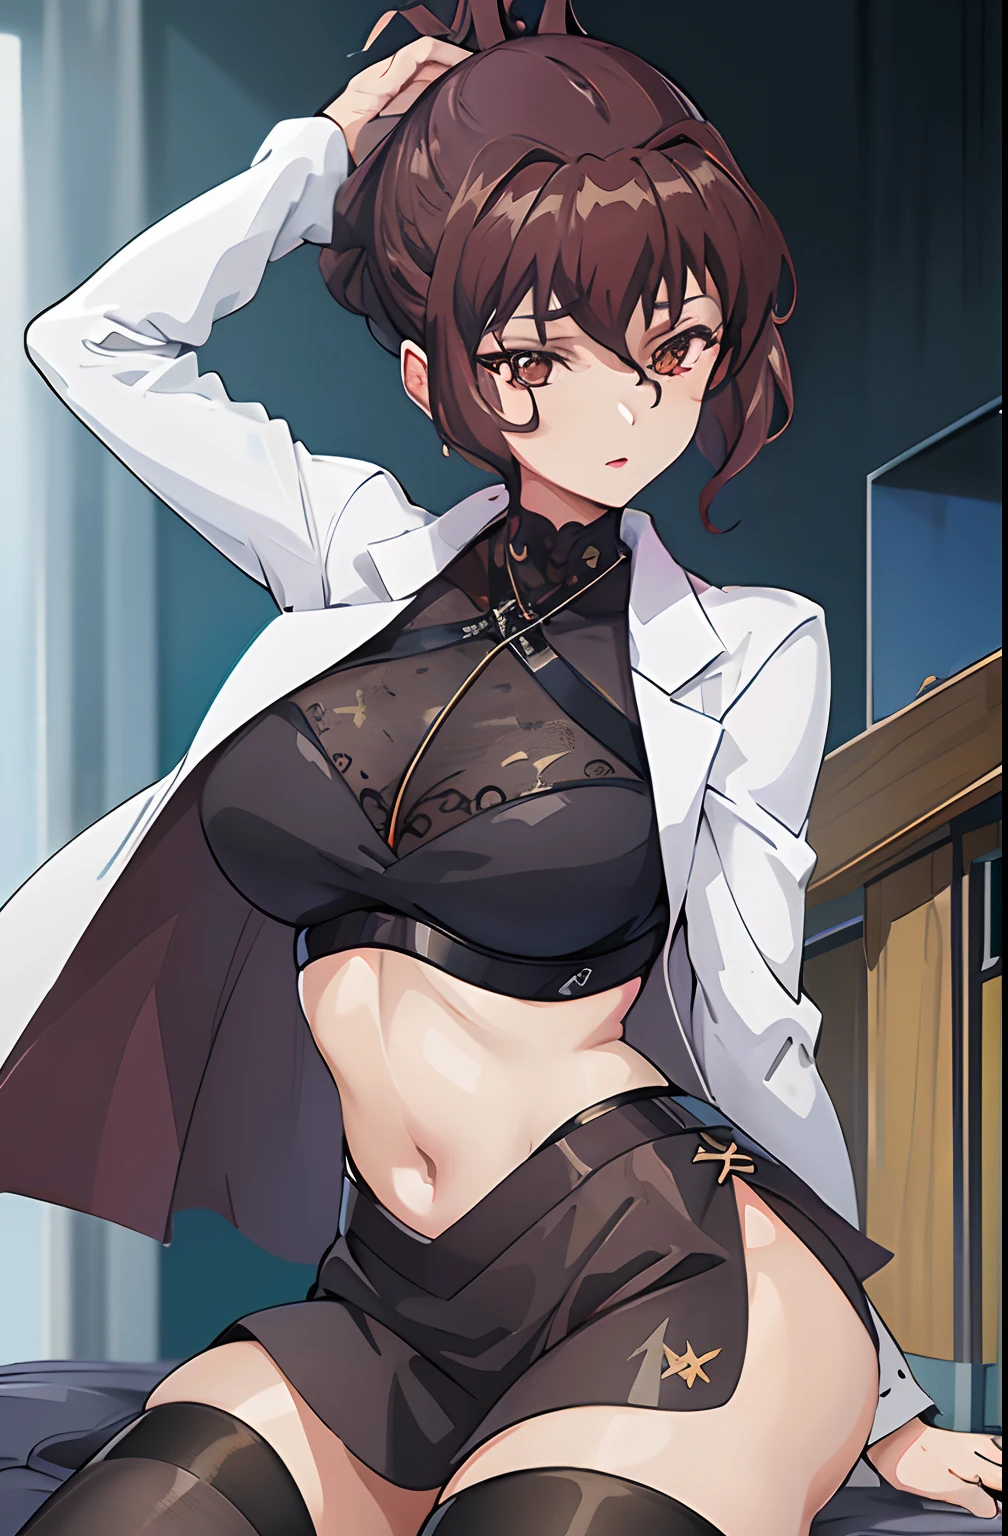 (masterpiece, The best quality:1.4), high sharpness, Aiko Katsuragi, mature female, (Full body shot:1.05) milf, curve, 1girl, anime face, sitting on the chair, tennis suit, mini skirt, (thighsjumps:1.05), make-up, big breasts, lipstick, brown eyes, folded ponytail, brown hair, neckline, perfect body, (athletic body:1.1), Perfect eyes, anime eyes, smoky eyeliner, eyeshadow, perfect face, smiling, sharp focus, medical room, Professional Illustrations, intricate details, vivid colors, fuzzy lighting, digital mixing, ultra detailed body, Ultra detailed hair, Ultra detailed face, Trends on Pixiv,